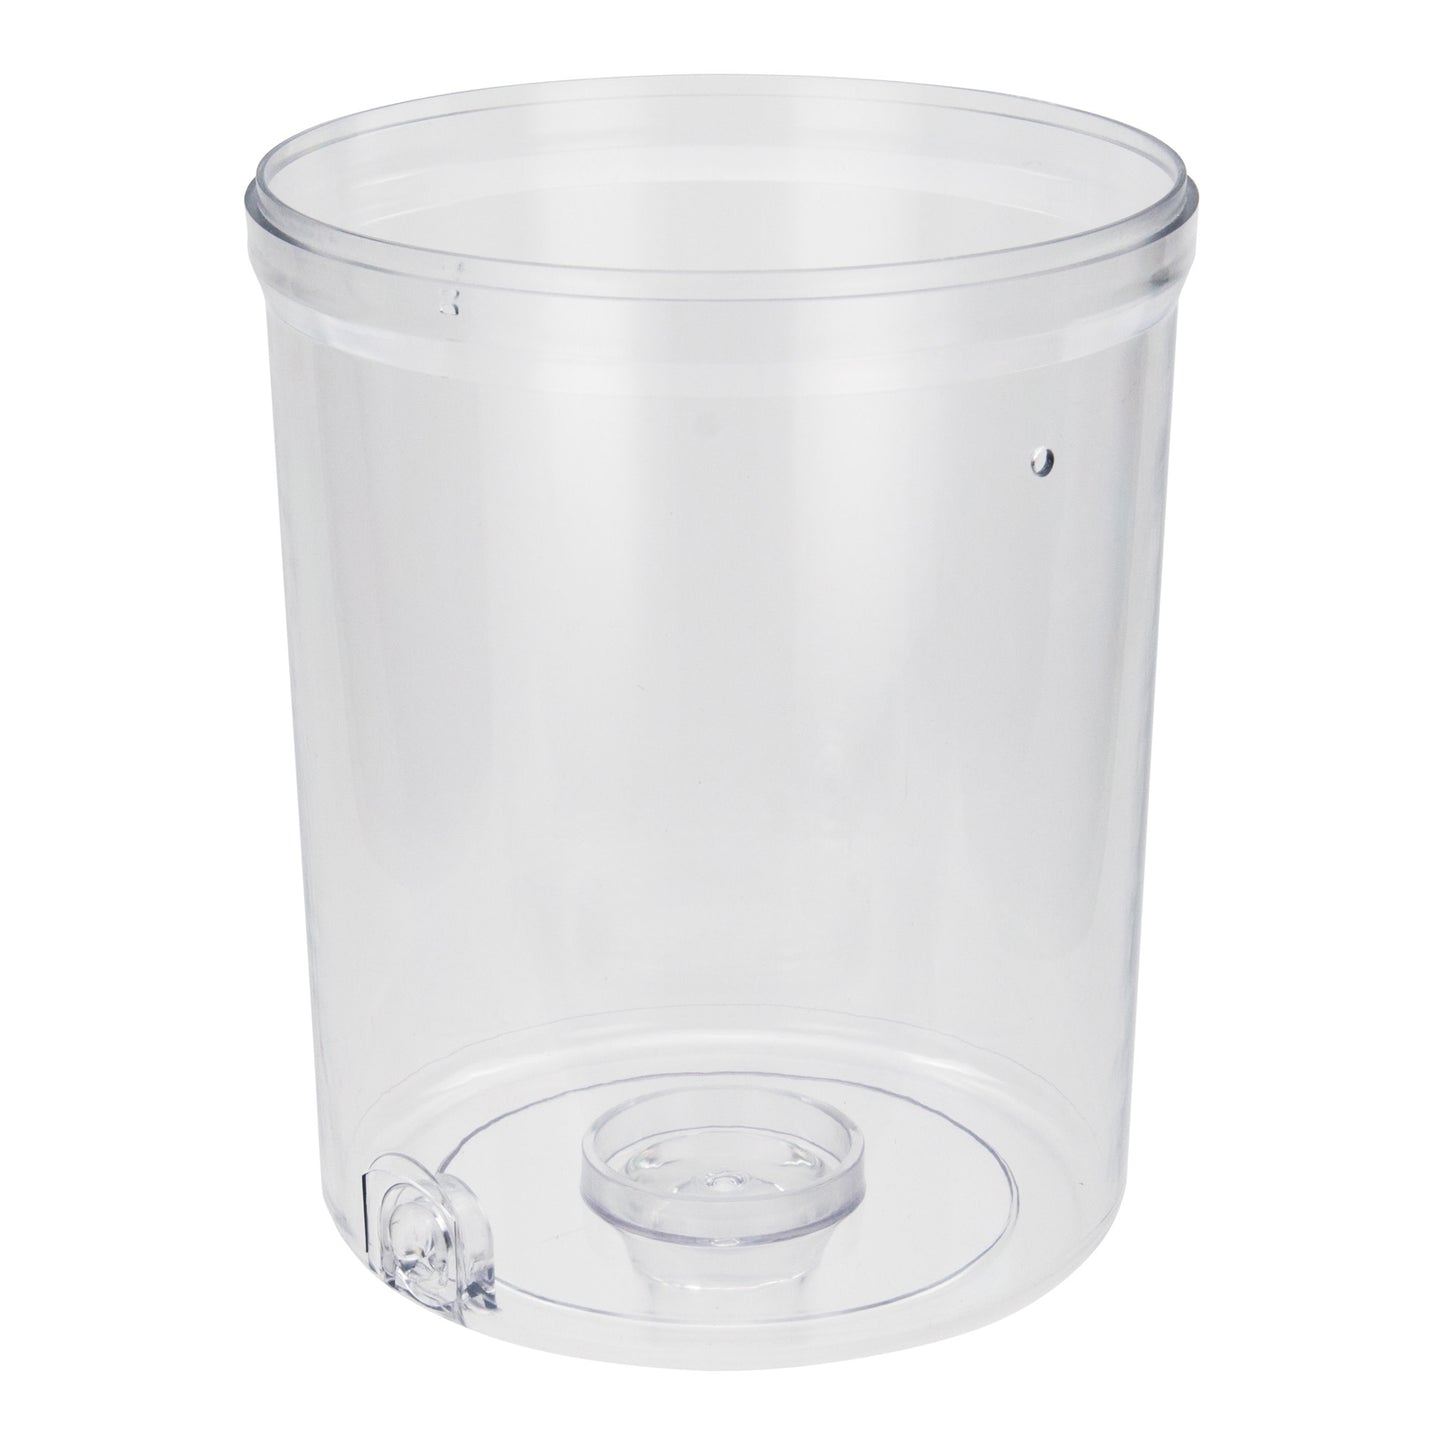 901-P1 - Polycarbonate Container Body for 901, 902, 906, 907